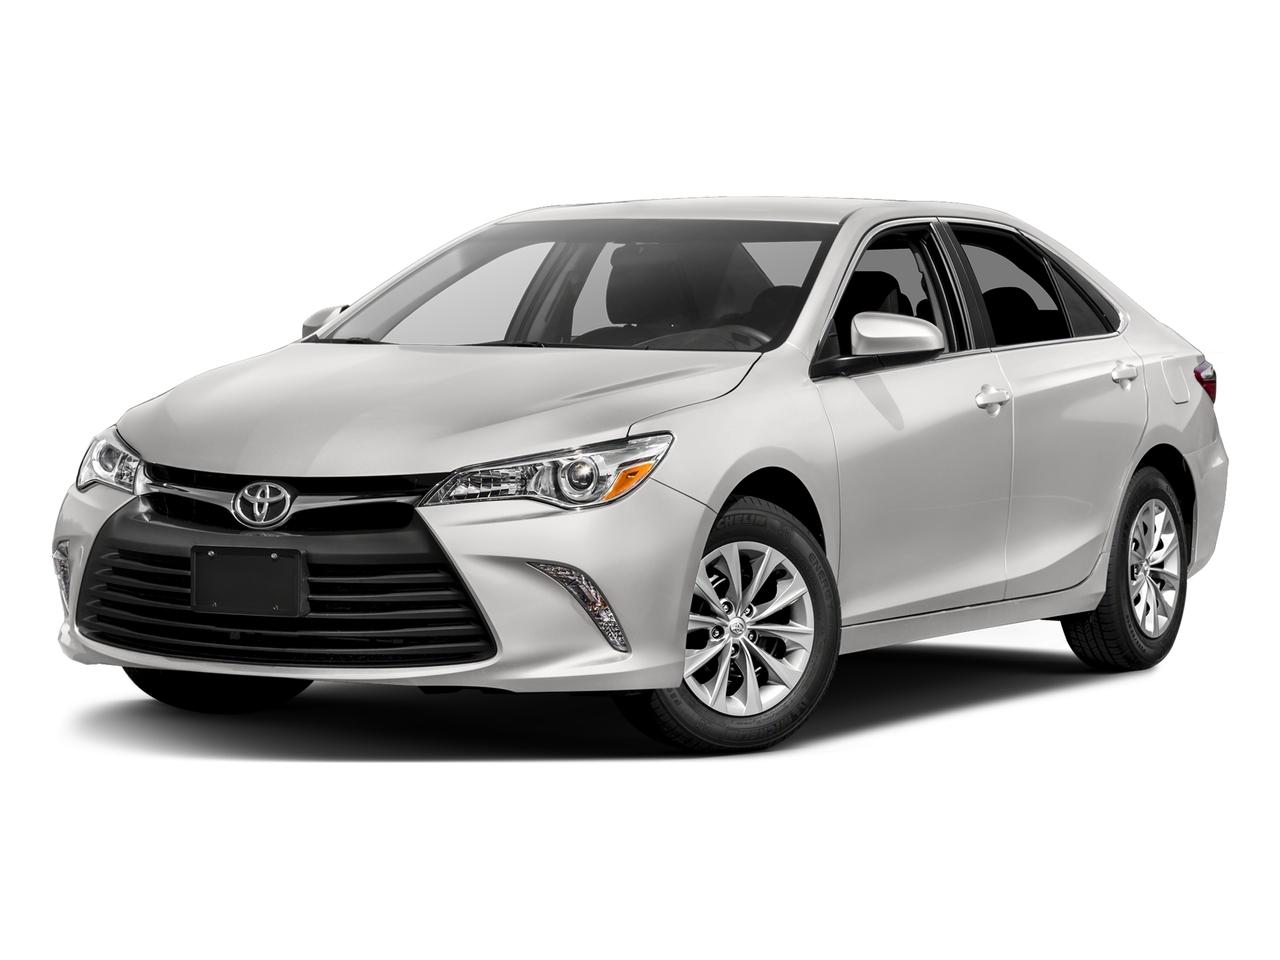 2017 Toyota Camry Vehicle Photo in Denison, TX 75020